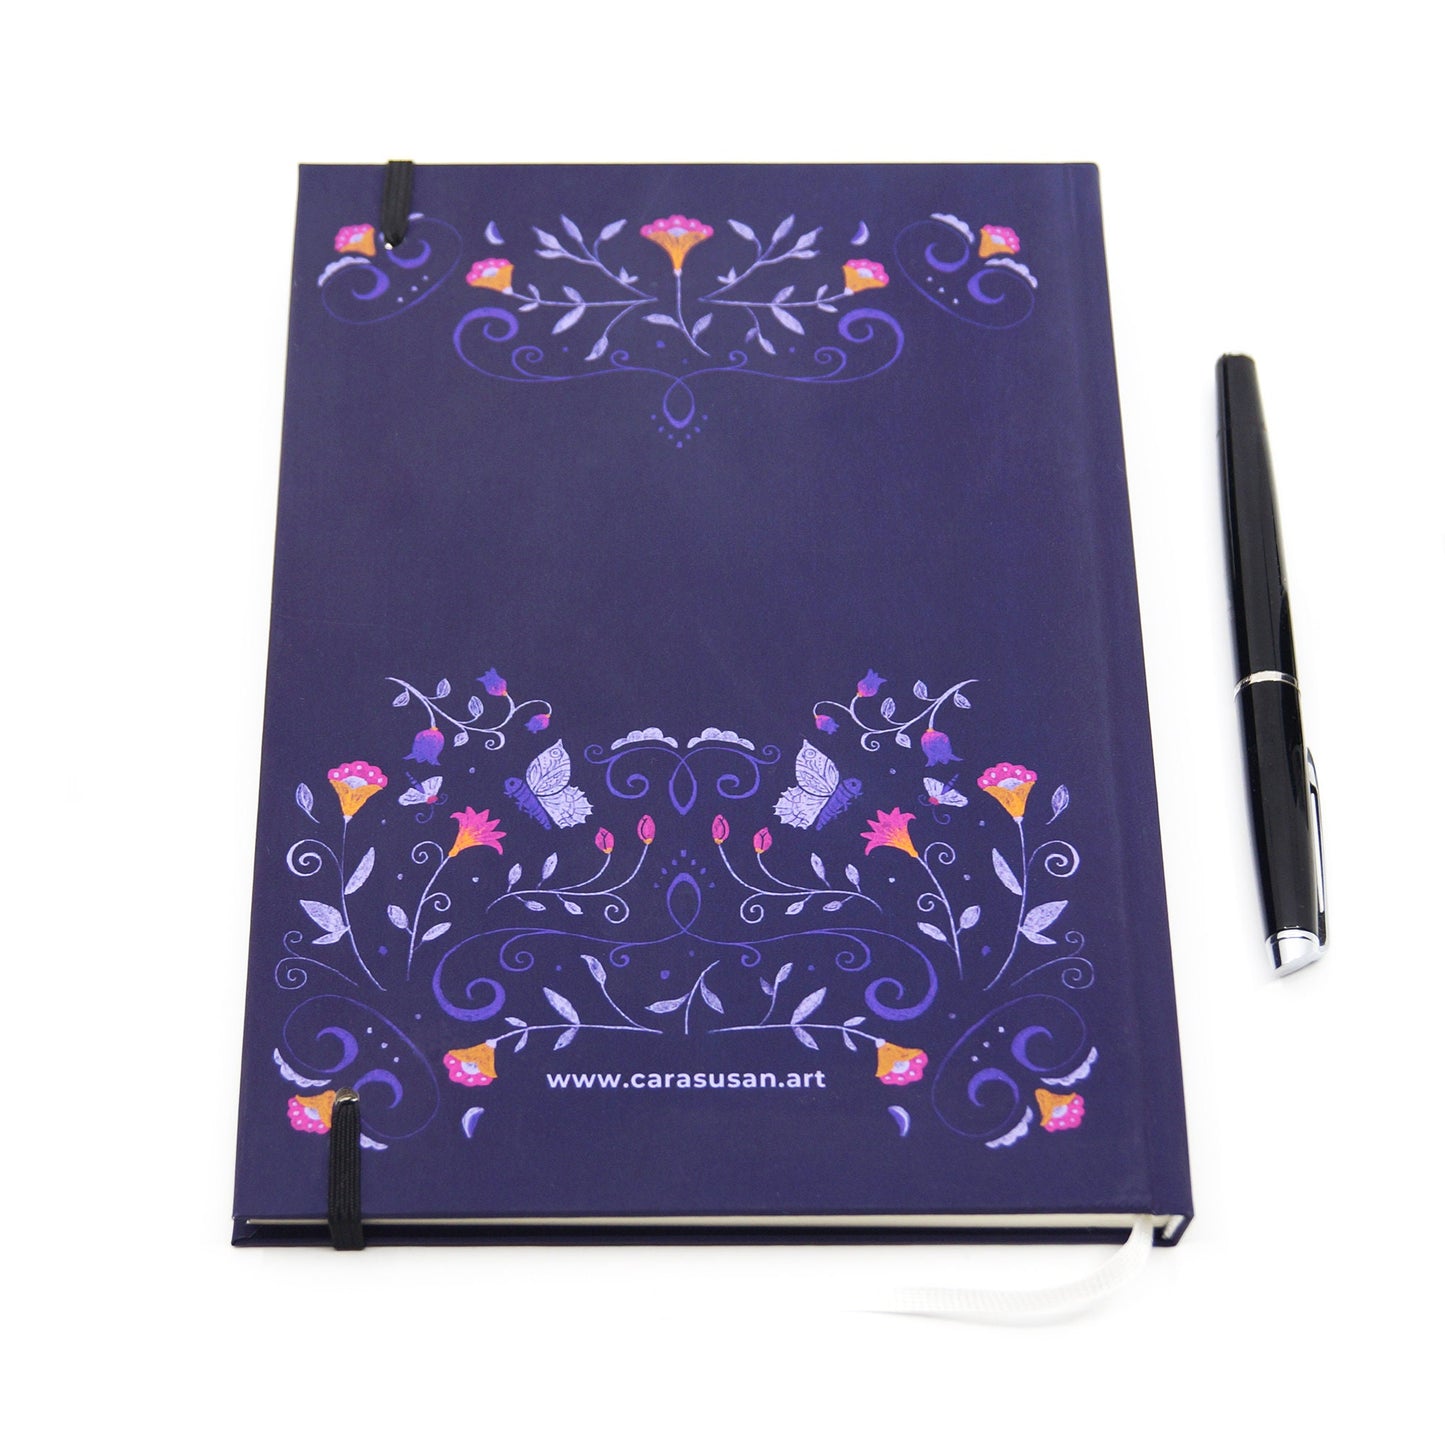 Dot grid notebook | violett | boho flowers | 128 pages with ribbon marker and rubber band